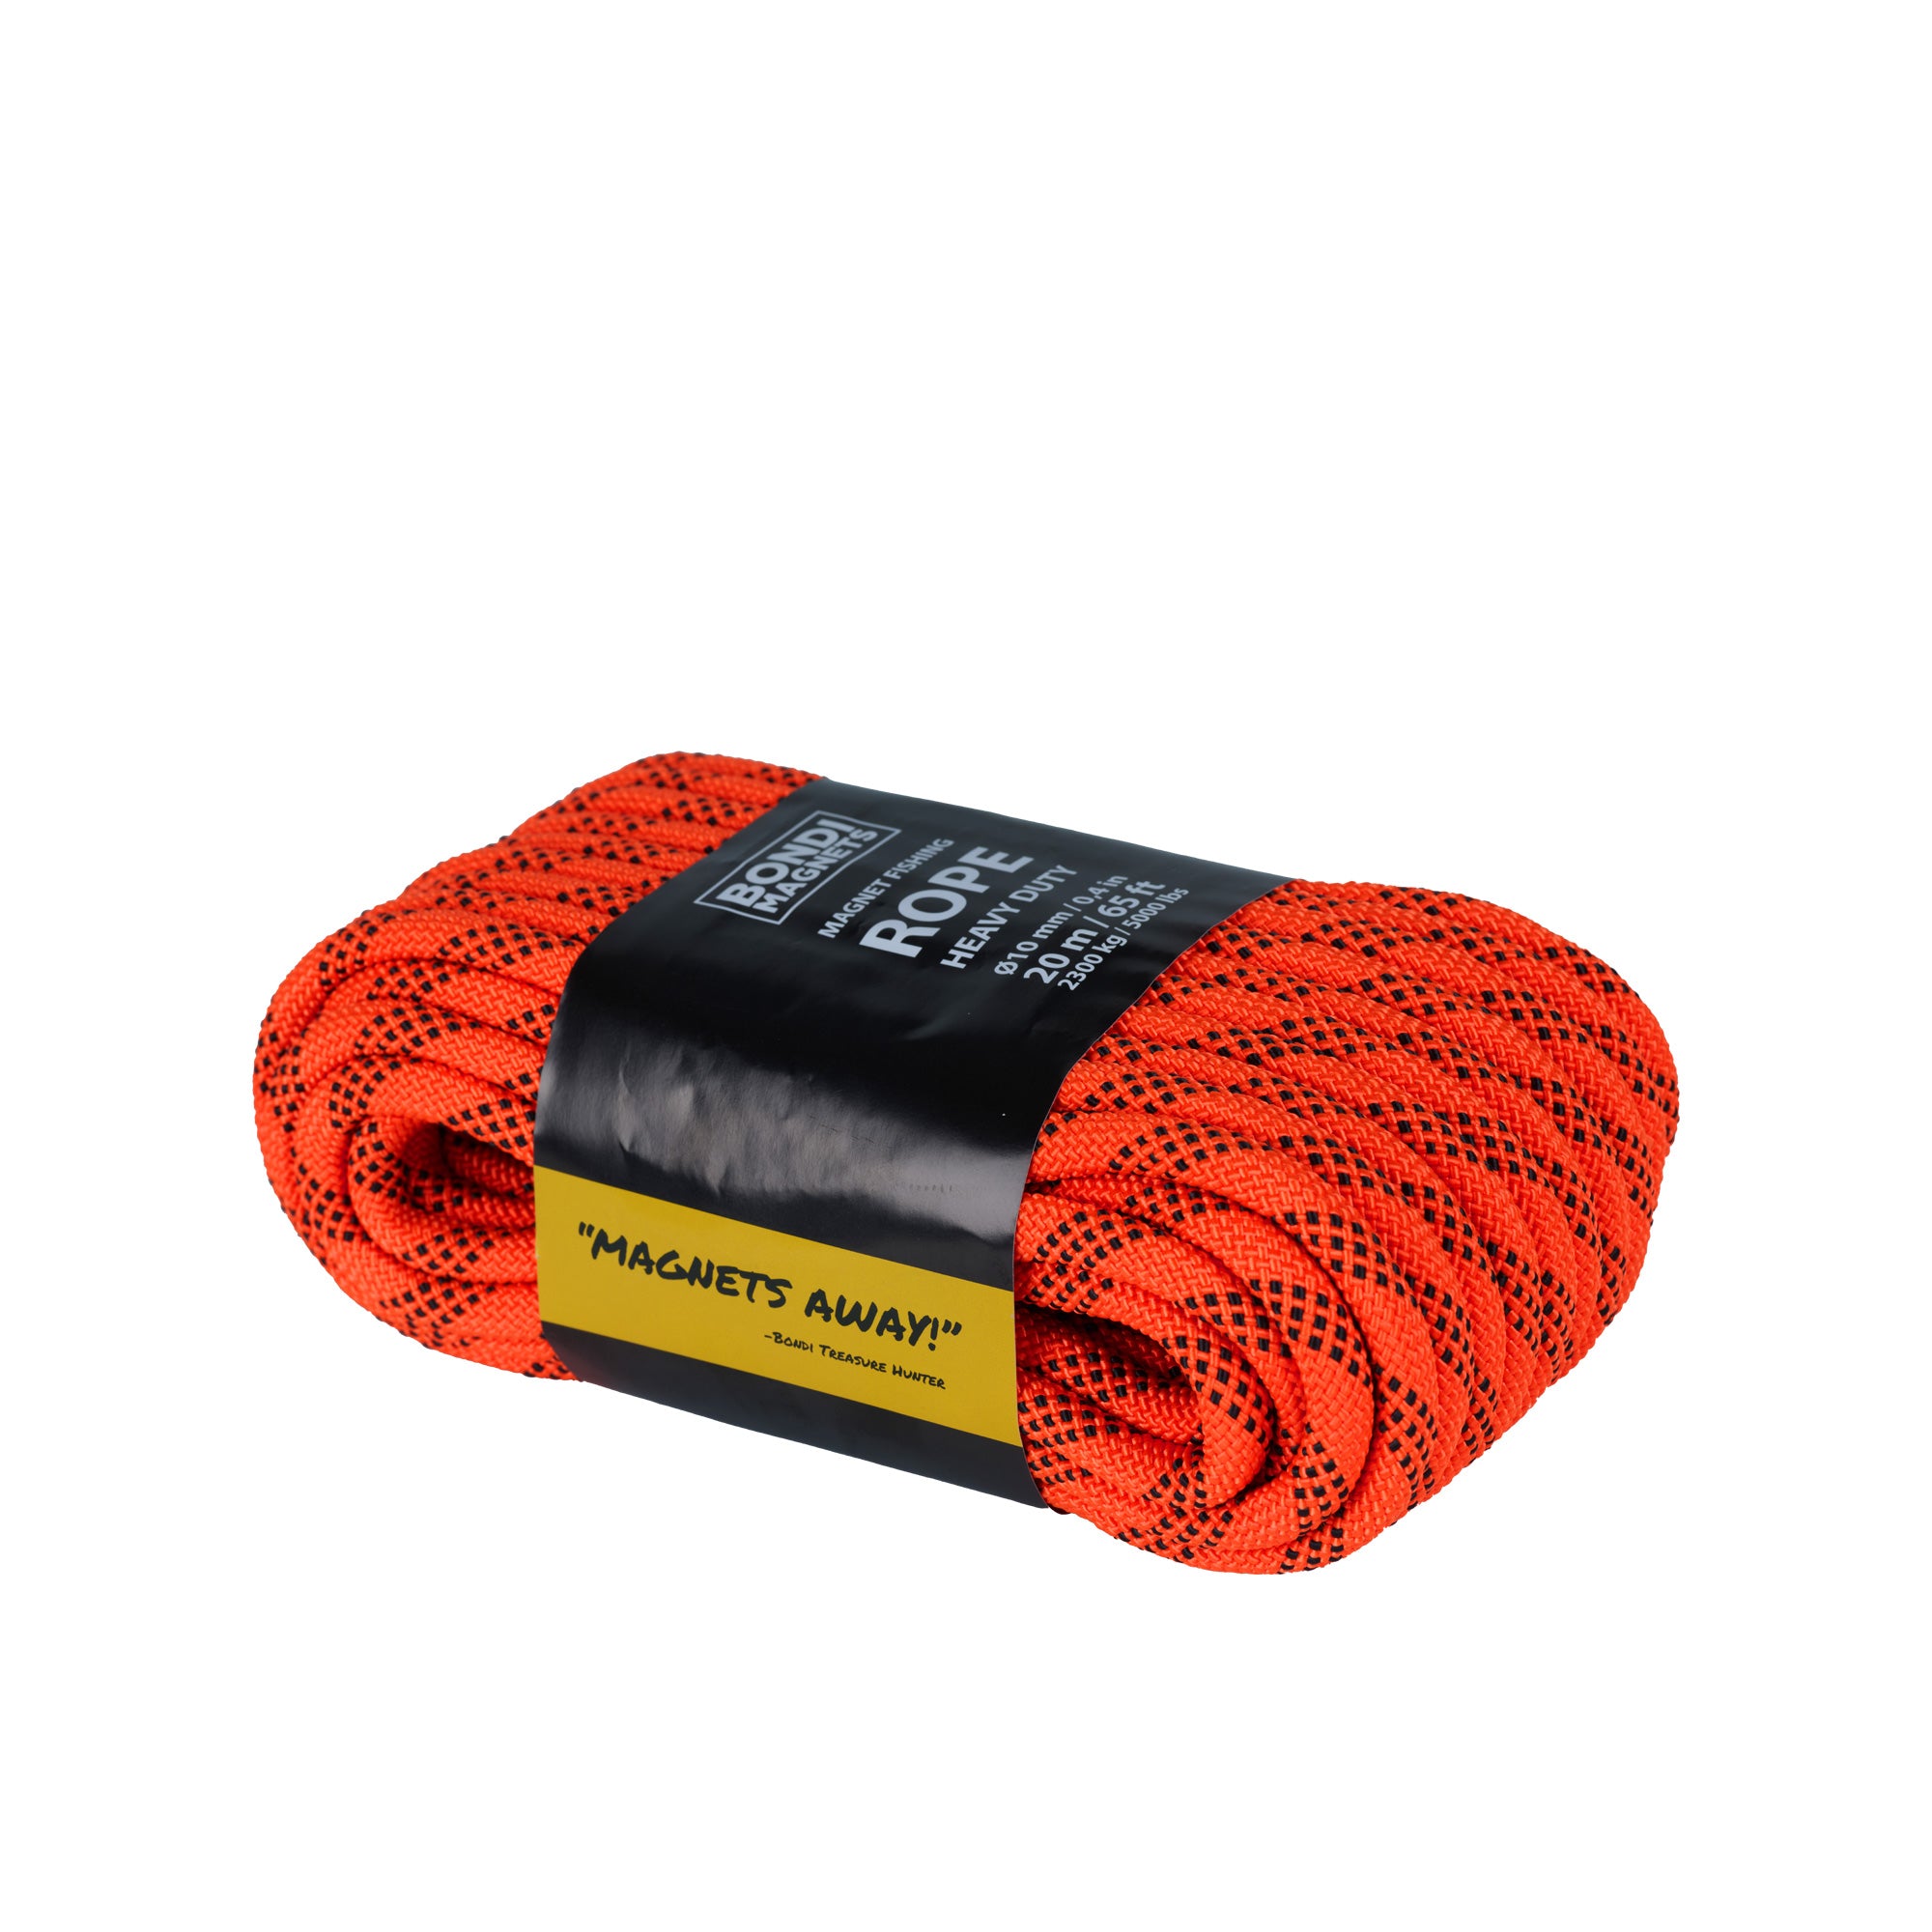 Sturdy magnetic rope